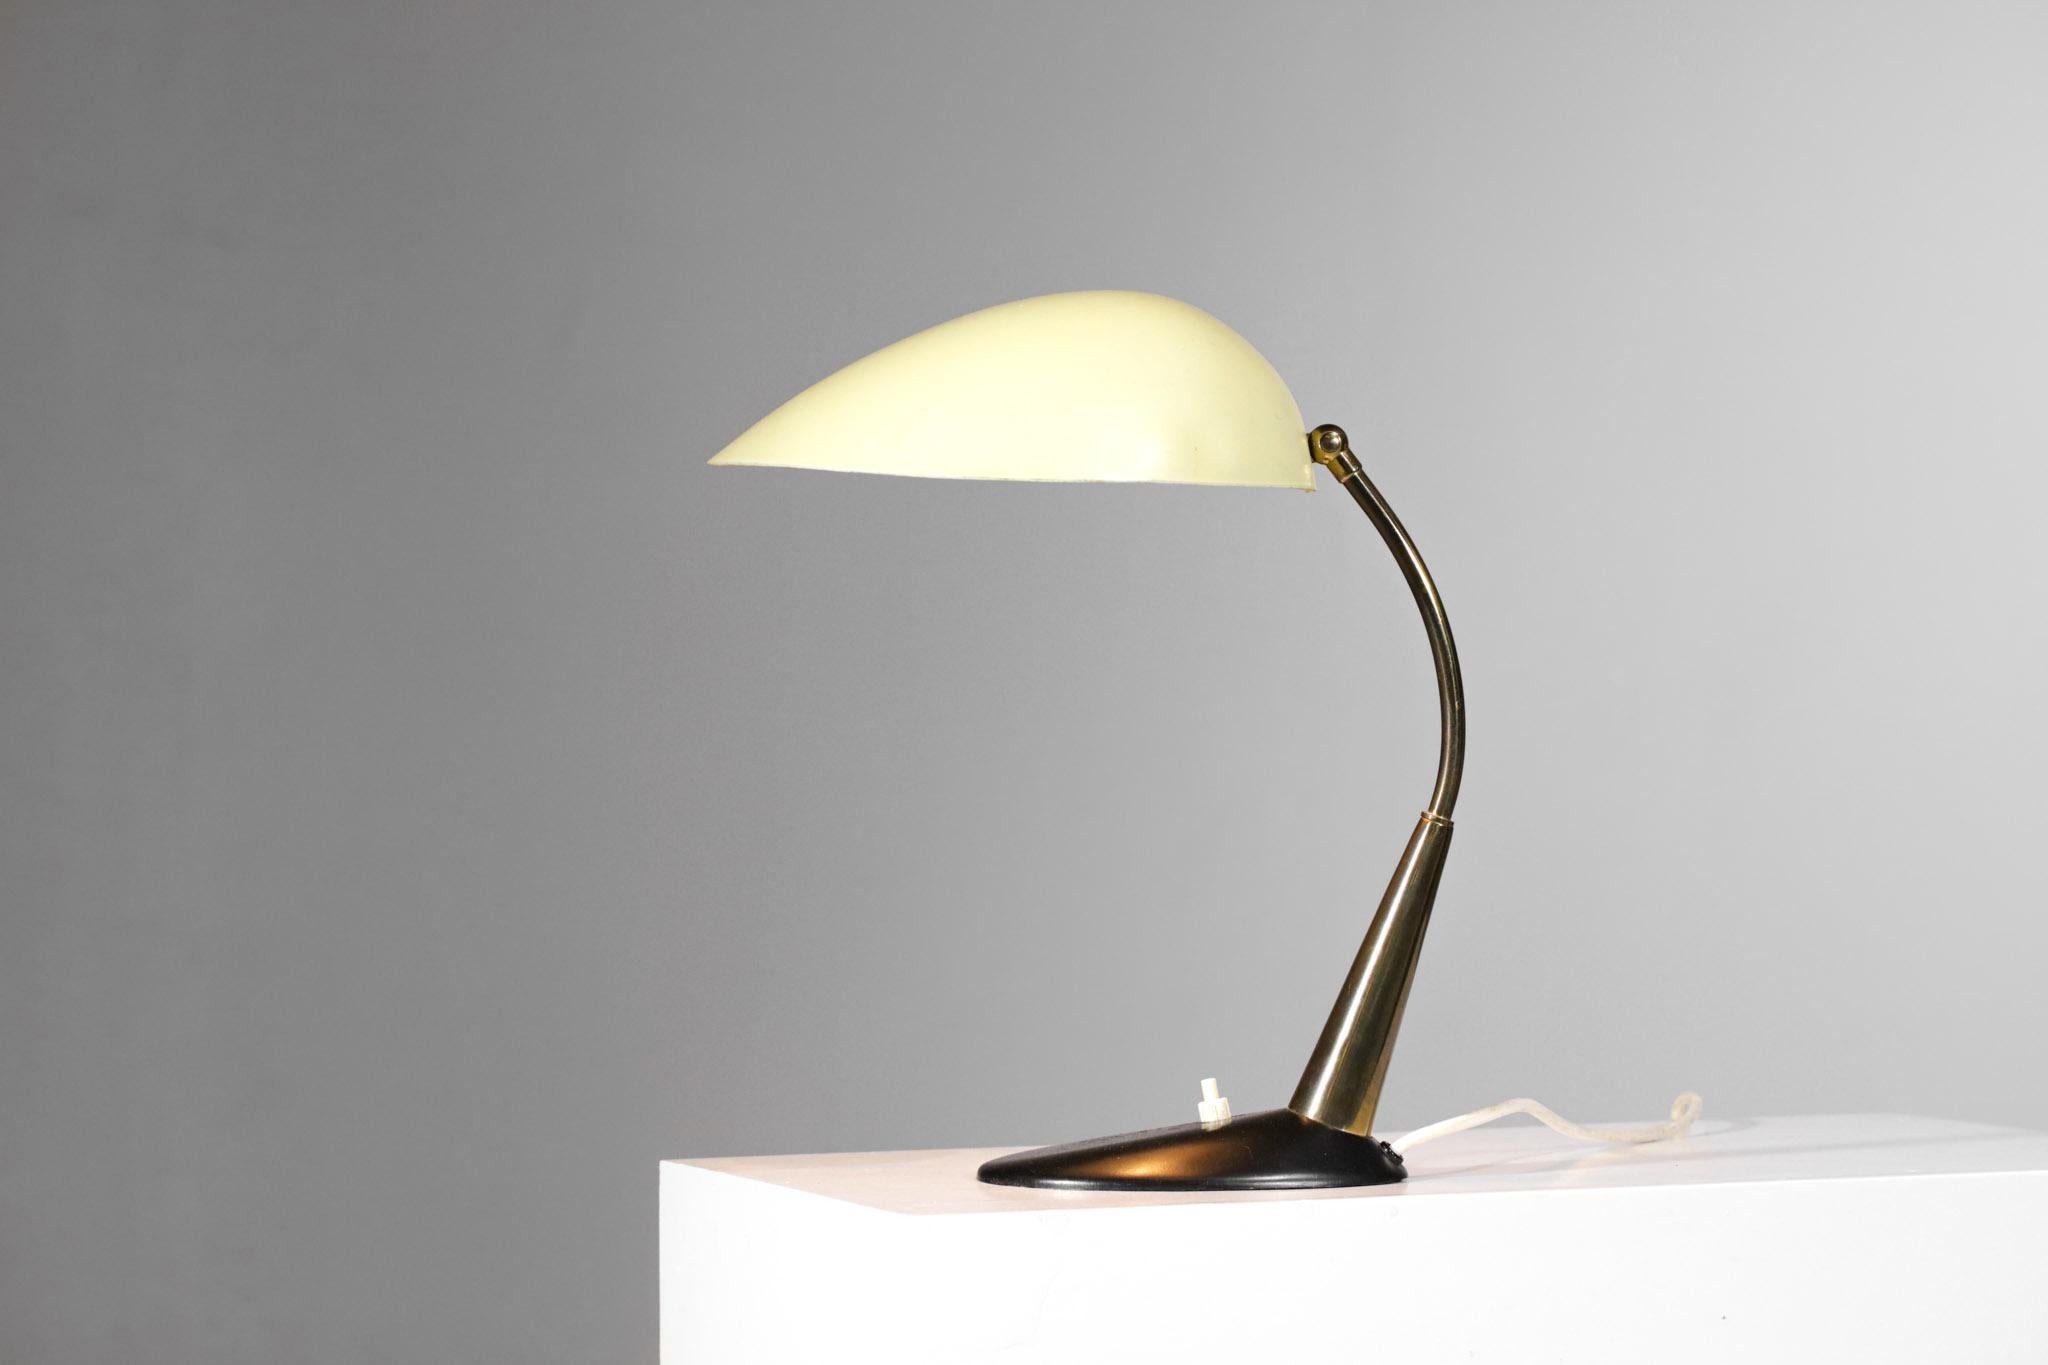 Desk lamp by German designer Cosack Leutchen from the 1950s. Black lacquered metal base, solid brass arm and yellow lacquered metal shade (original paint). Very nice vintage condition, please note traces of use and time on the whole and particularly